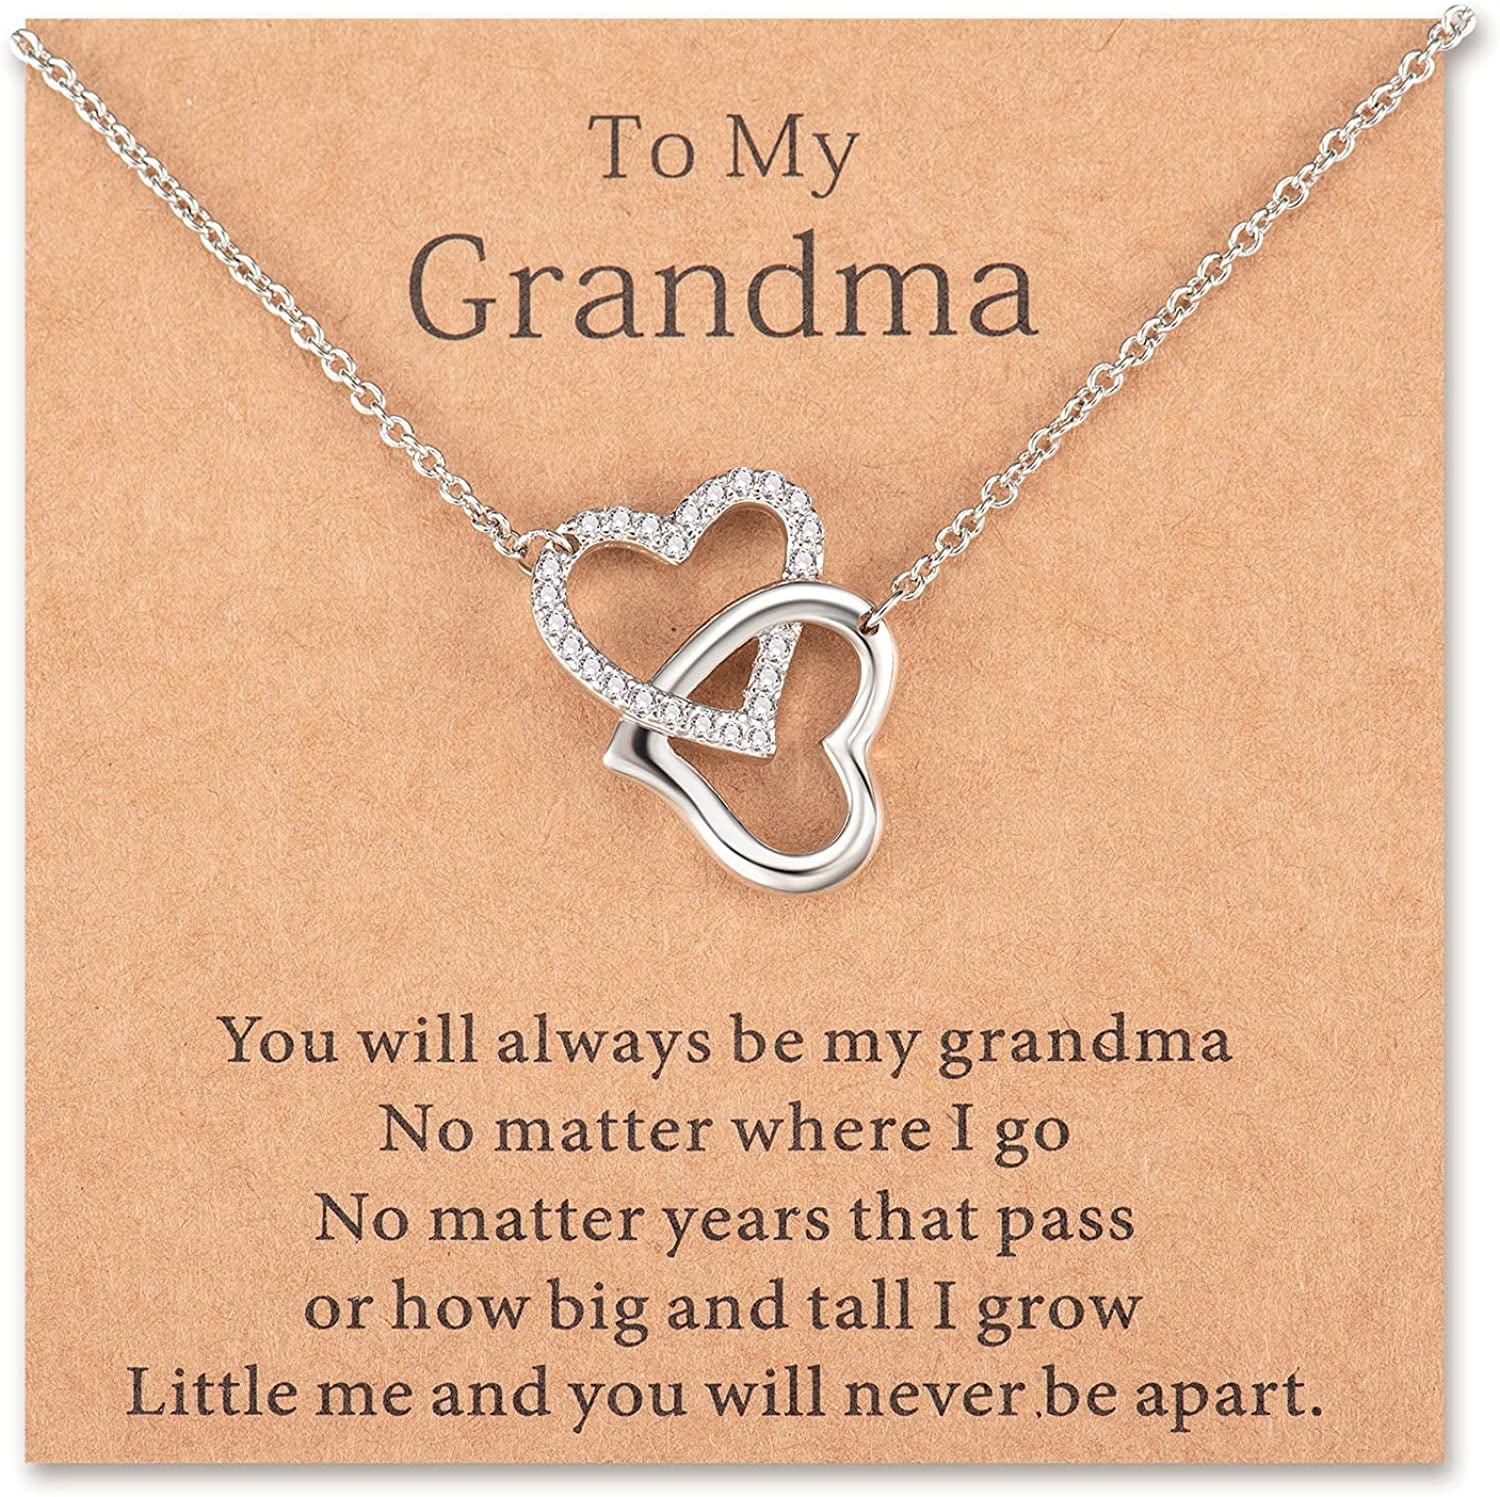 MANVEN Mothers Day Gifts for Grandma Necklace Interlocking Heart Necklace Birthday Gifts for Grandma from Granddaughter